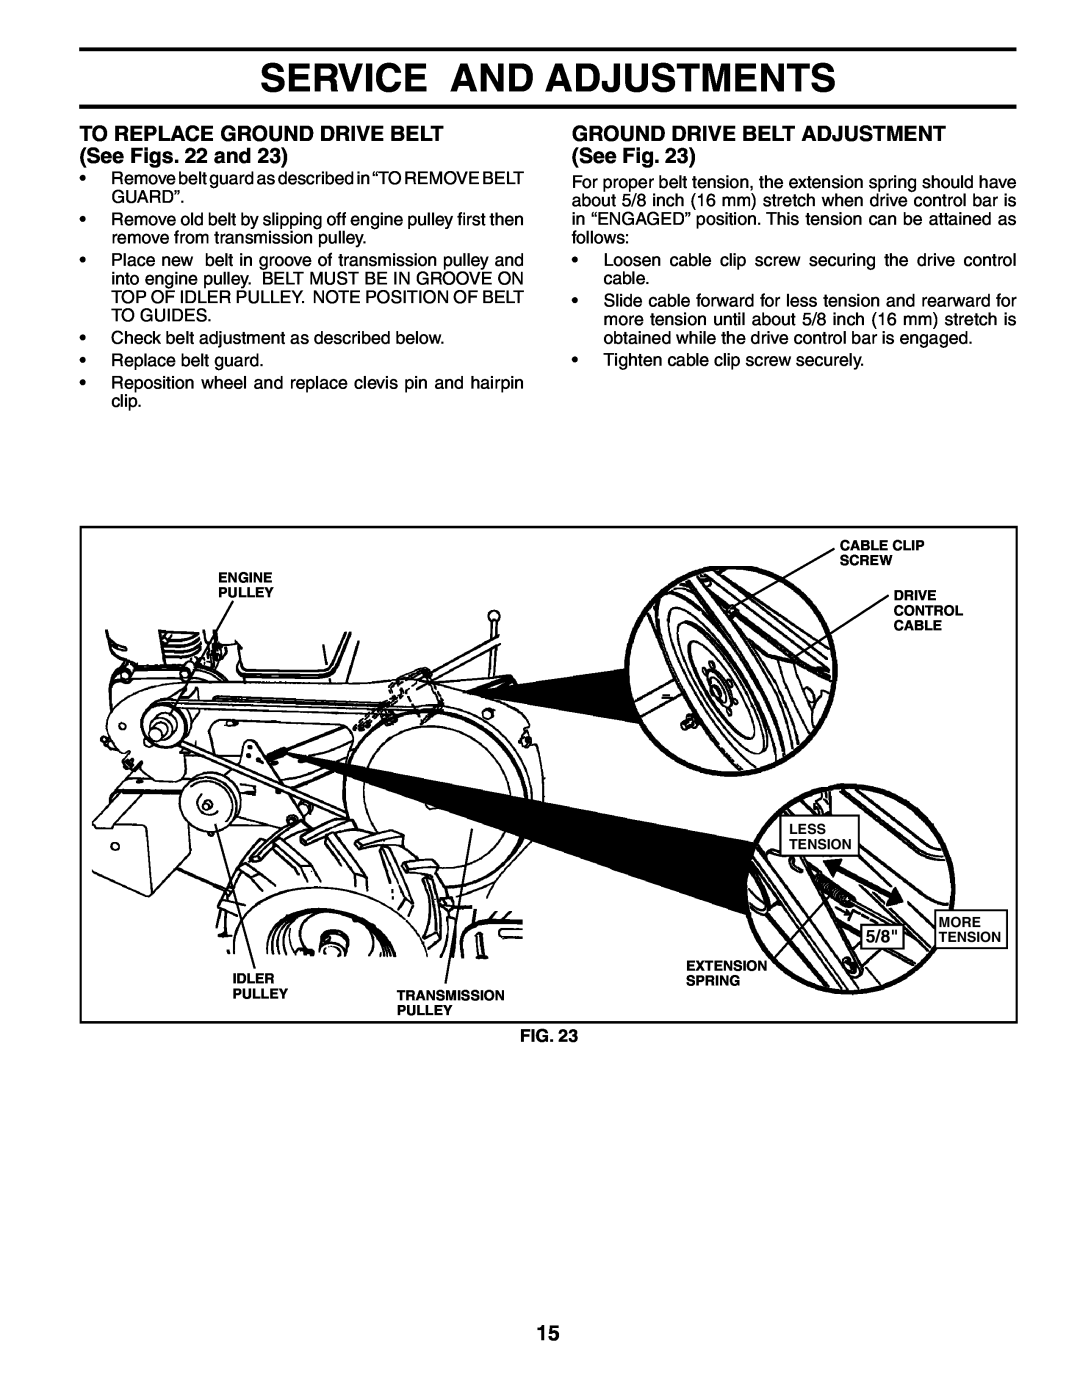 Poulan 188904 TO REPLACE GROUND DRIVE BELT See Figs. 22 and, GROUND DRIVE BELT ADJUSTMENT See Fig, Service And Adjustments 